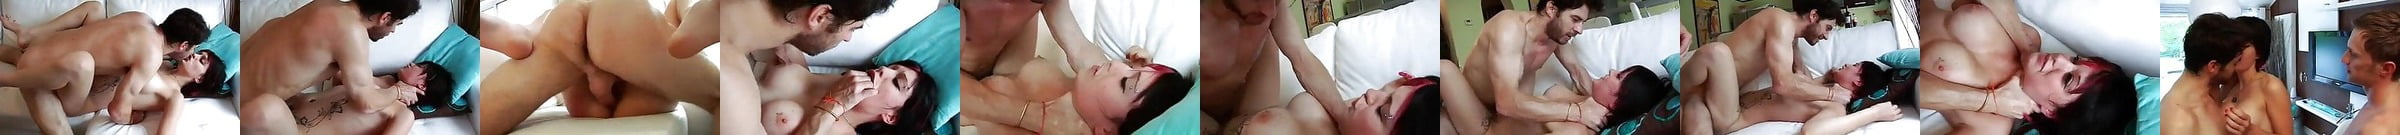 Very Rough And Brutal Sex For A Submissive Slut Porn B2 Xhamster